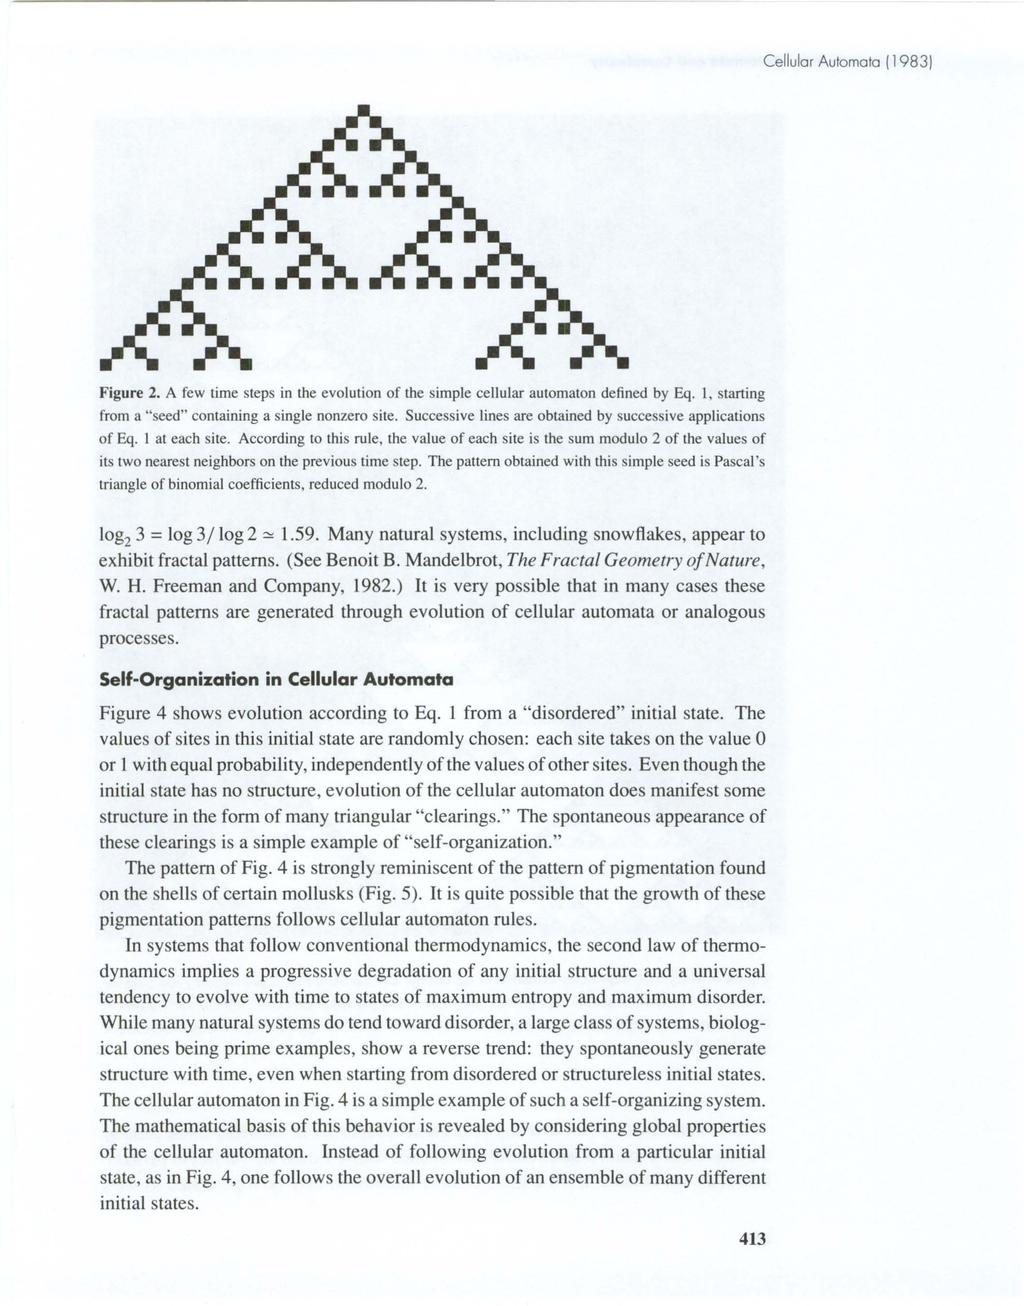 Cellular Automoto (19831 Figure 2. A few time steps in the evolution of the simple cellular automaton defined by Eq. I, starting from a "seed" containing a single nonzero site.